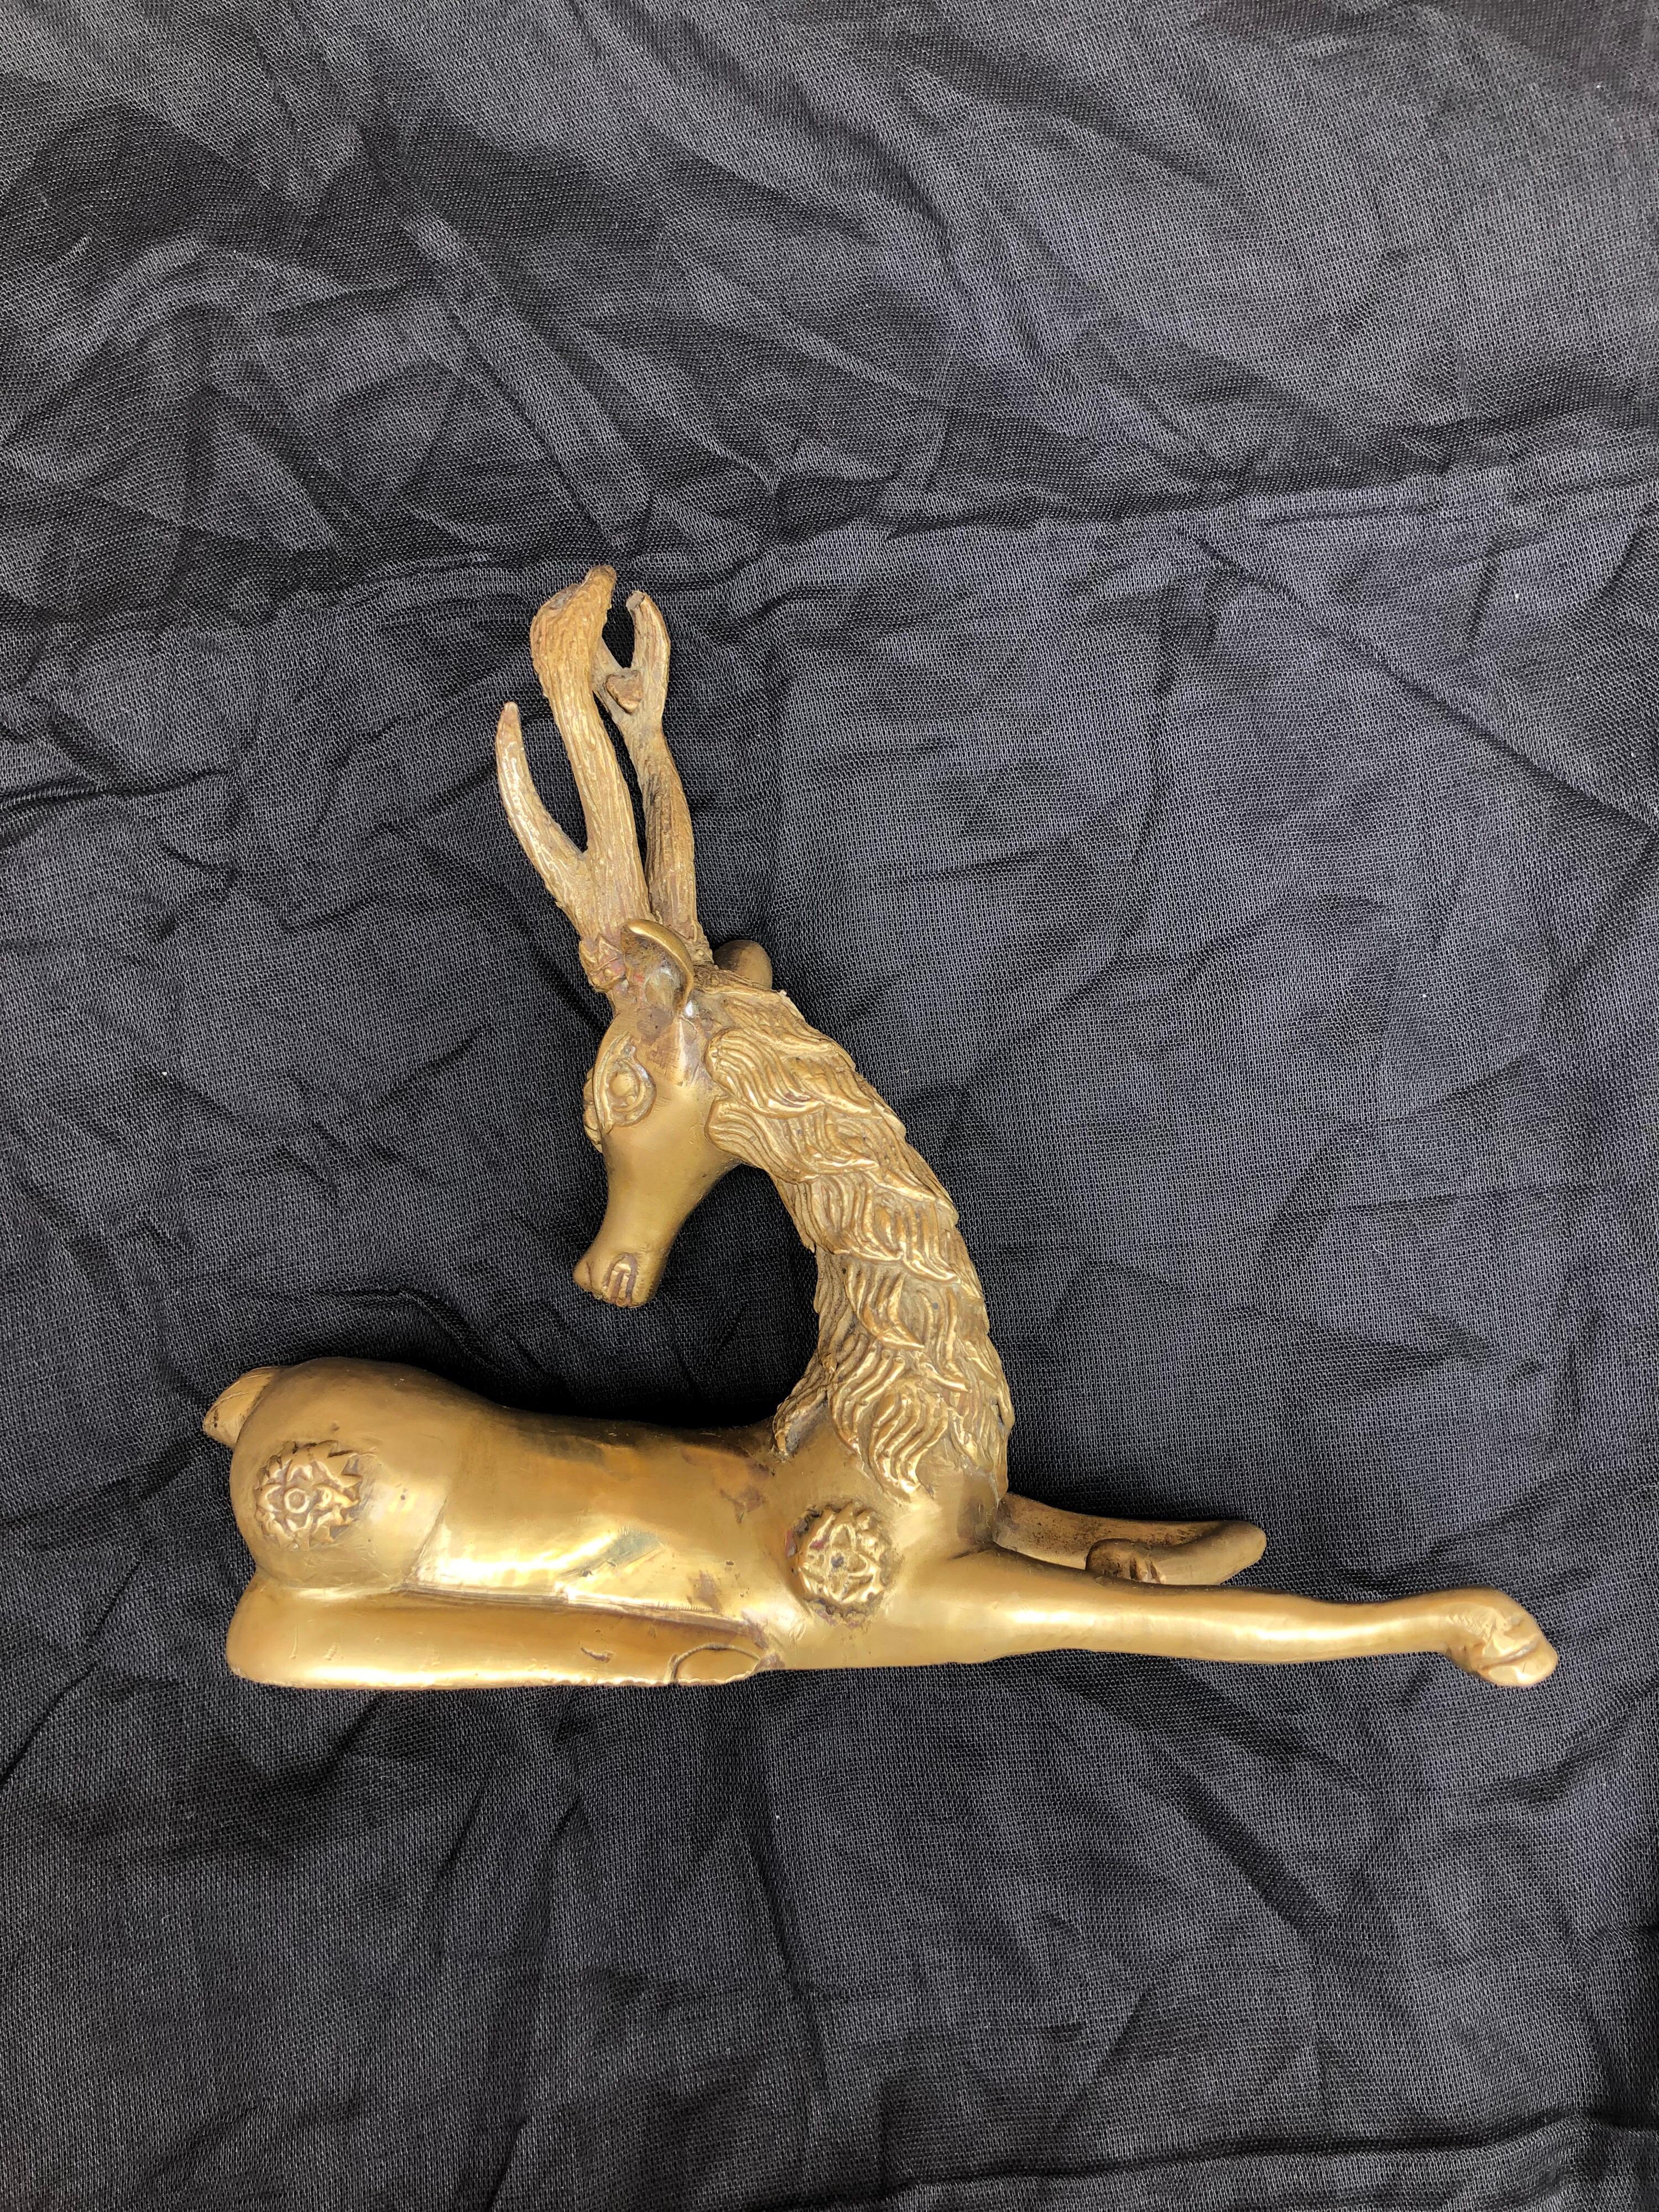 The antique brass gazelle was sourced in the ancient city of Fes, Morocco. Completely handcrafted, with beautiful detailed embossing. The manner in which this is crafted and symbols found on the gazelle date this item in the late 1800s-early